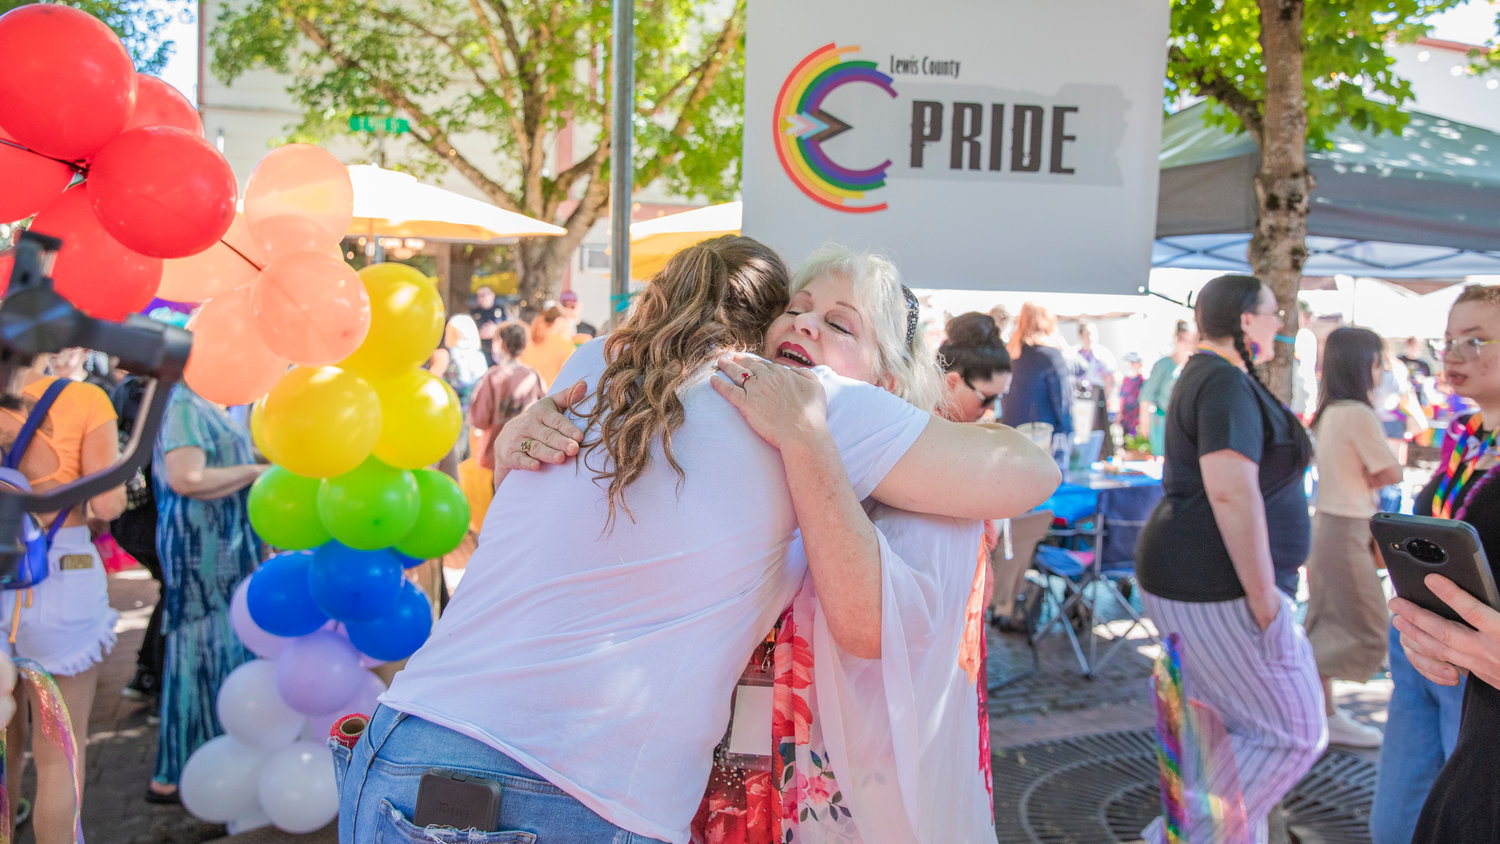 Hope Schumacher receives an embrace after cutting a ribbon to mark the beginning of a pride event in downtown Centralia after honoring the life of Rikkey Outumuro.